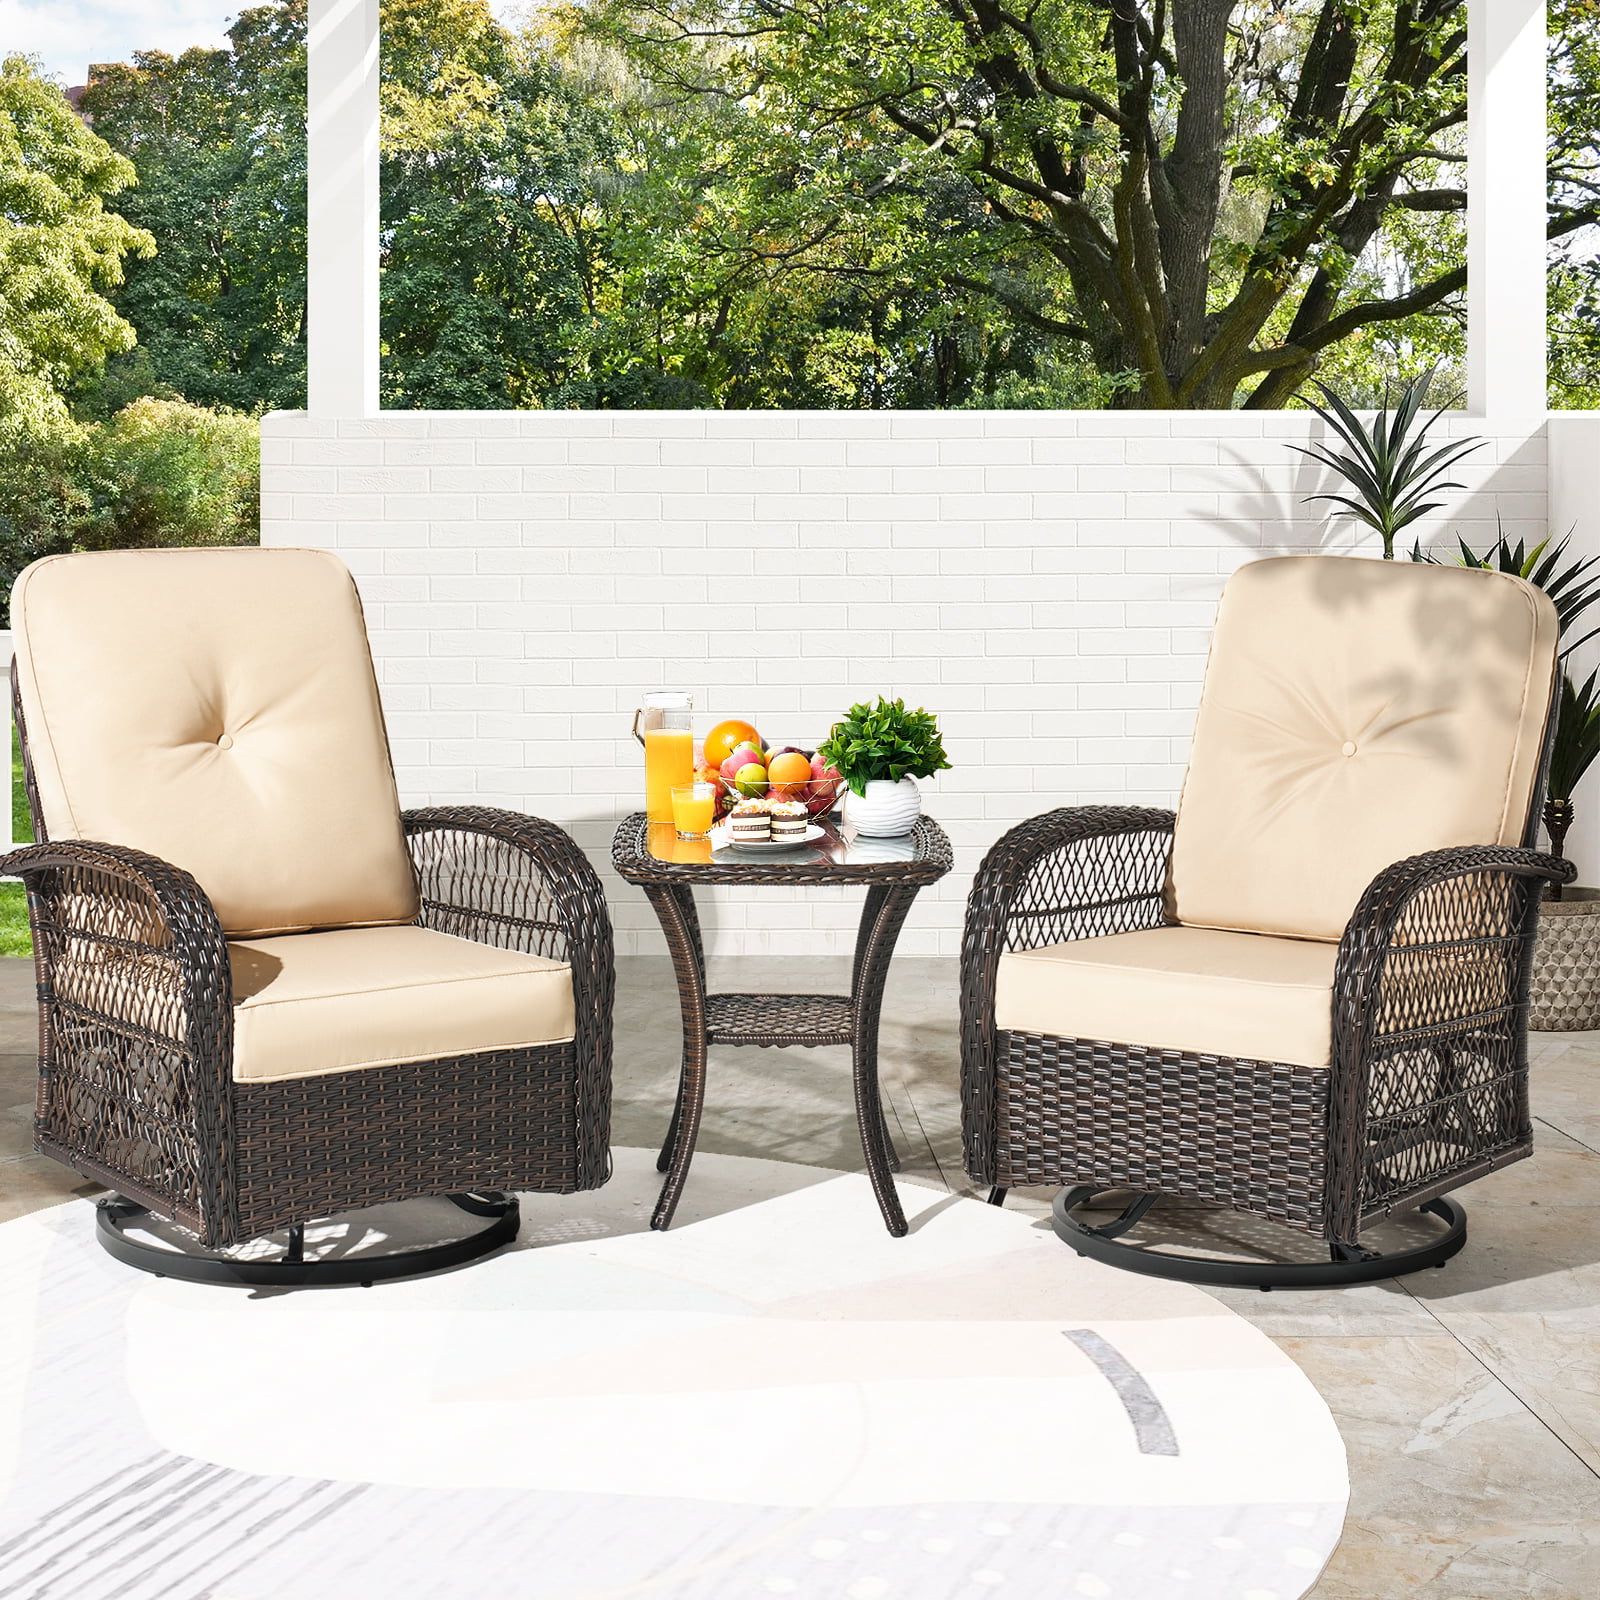 2018 Sonegra 3 Pieces Outdoor Wicker Swivel Rocker Patio Set, 360 Degree Swivel  Rocking Chairs Elegant Wicker Patio Bistro Set With Premuim Cushions And  Armored Glass Top Side Table For Backyard(beige) – Walmart Pertaining To 3 Pieces Outdoor Patio Swivel Rocker Set (View 5 of 15)